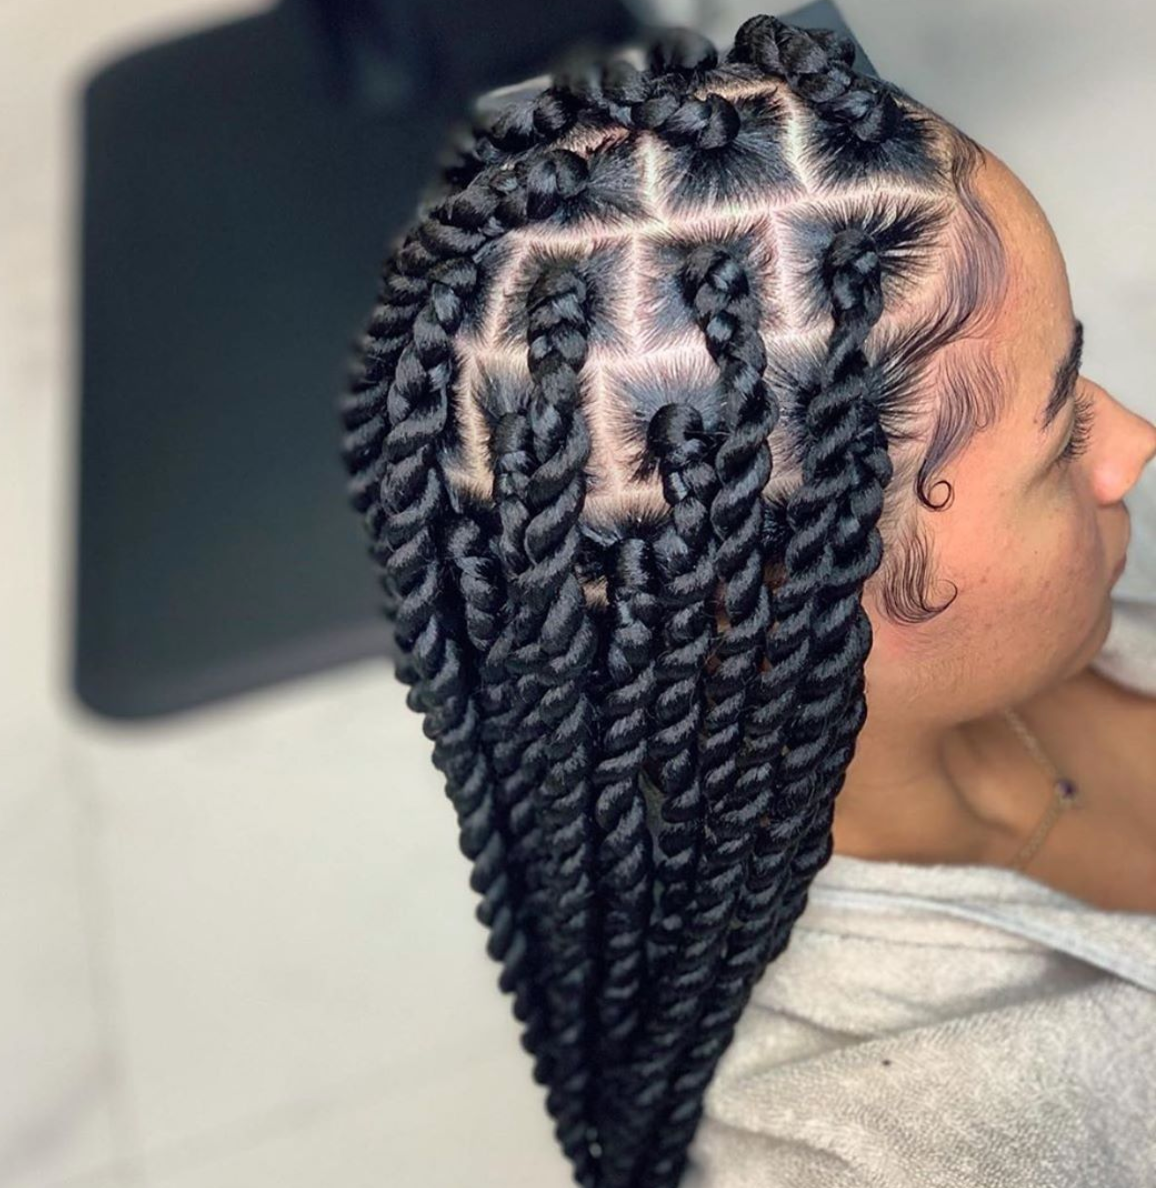 16 Beauties On Instagram With The Most Slayed Edges | Essence